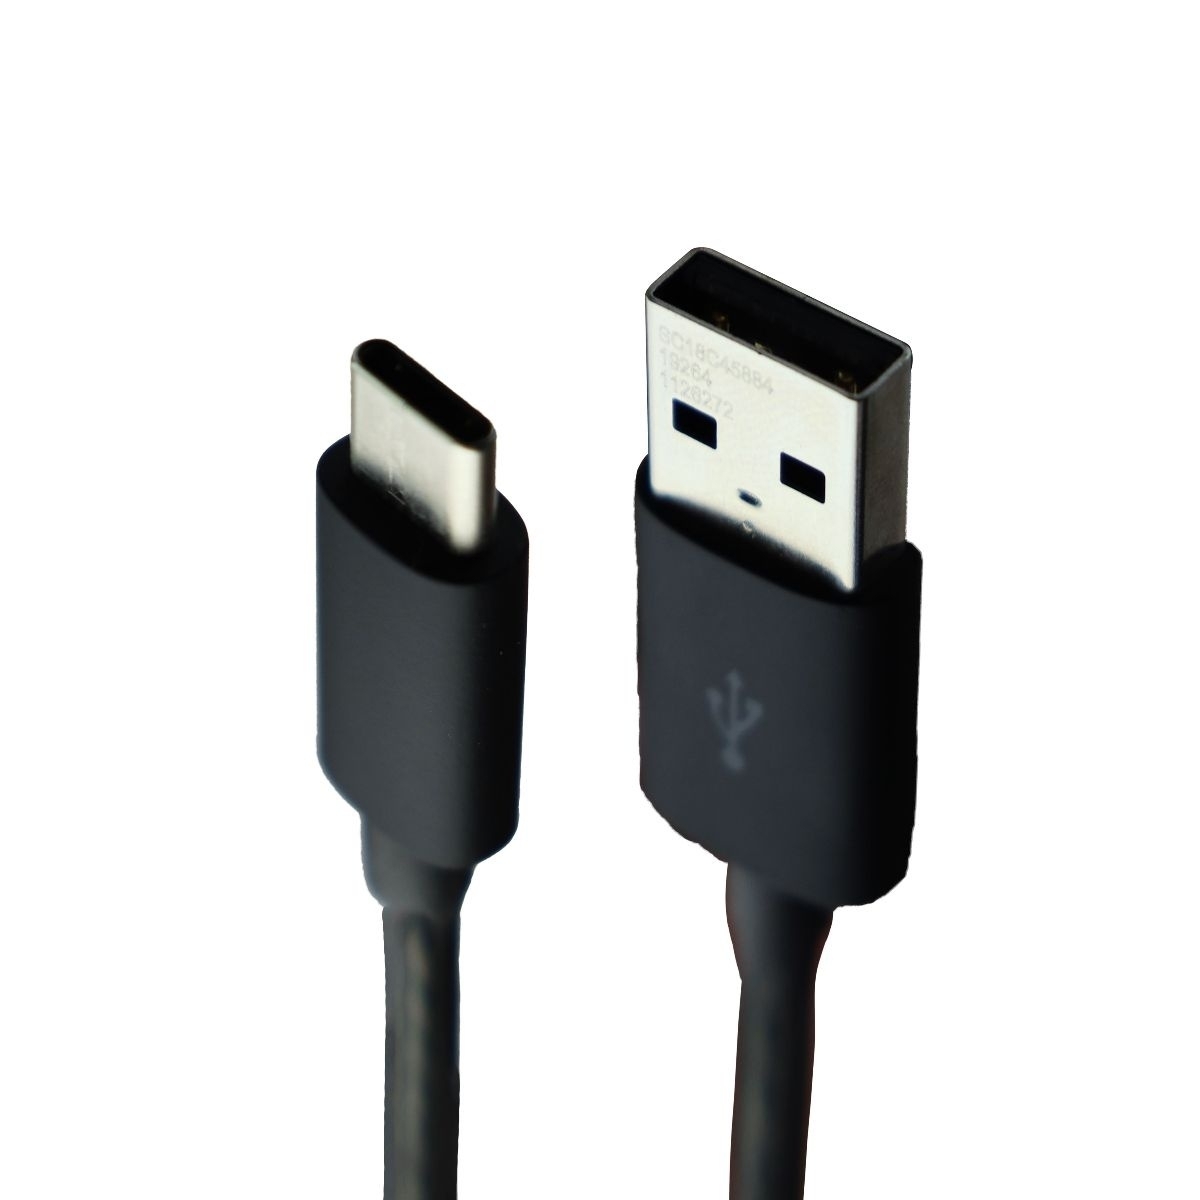 Universal USB-C To USB Braided Cable (3.5FT) - Black/Gray